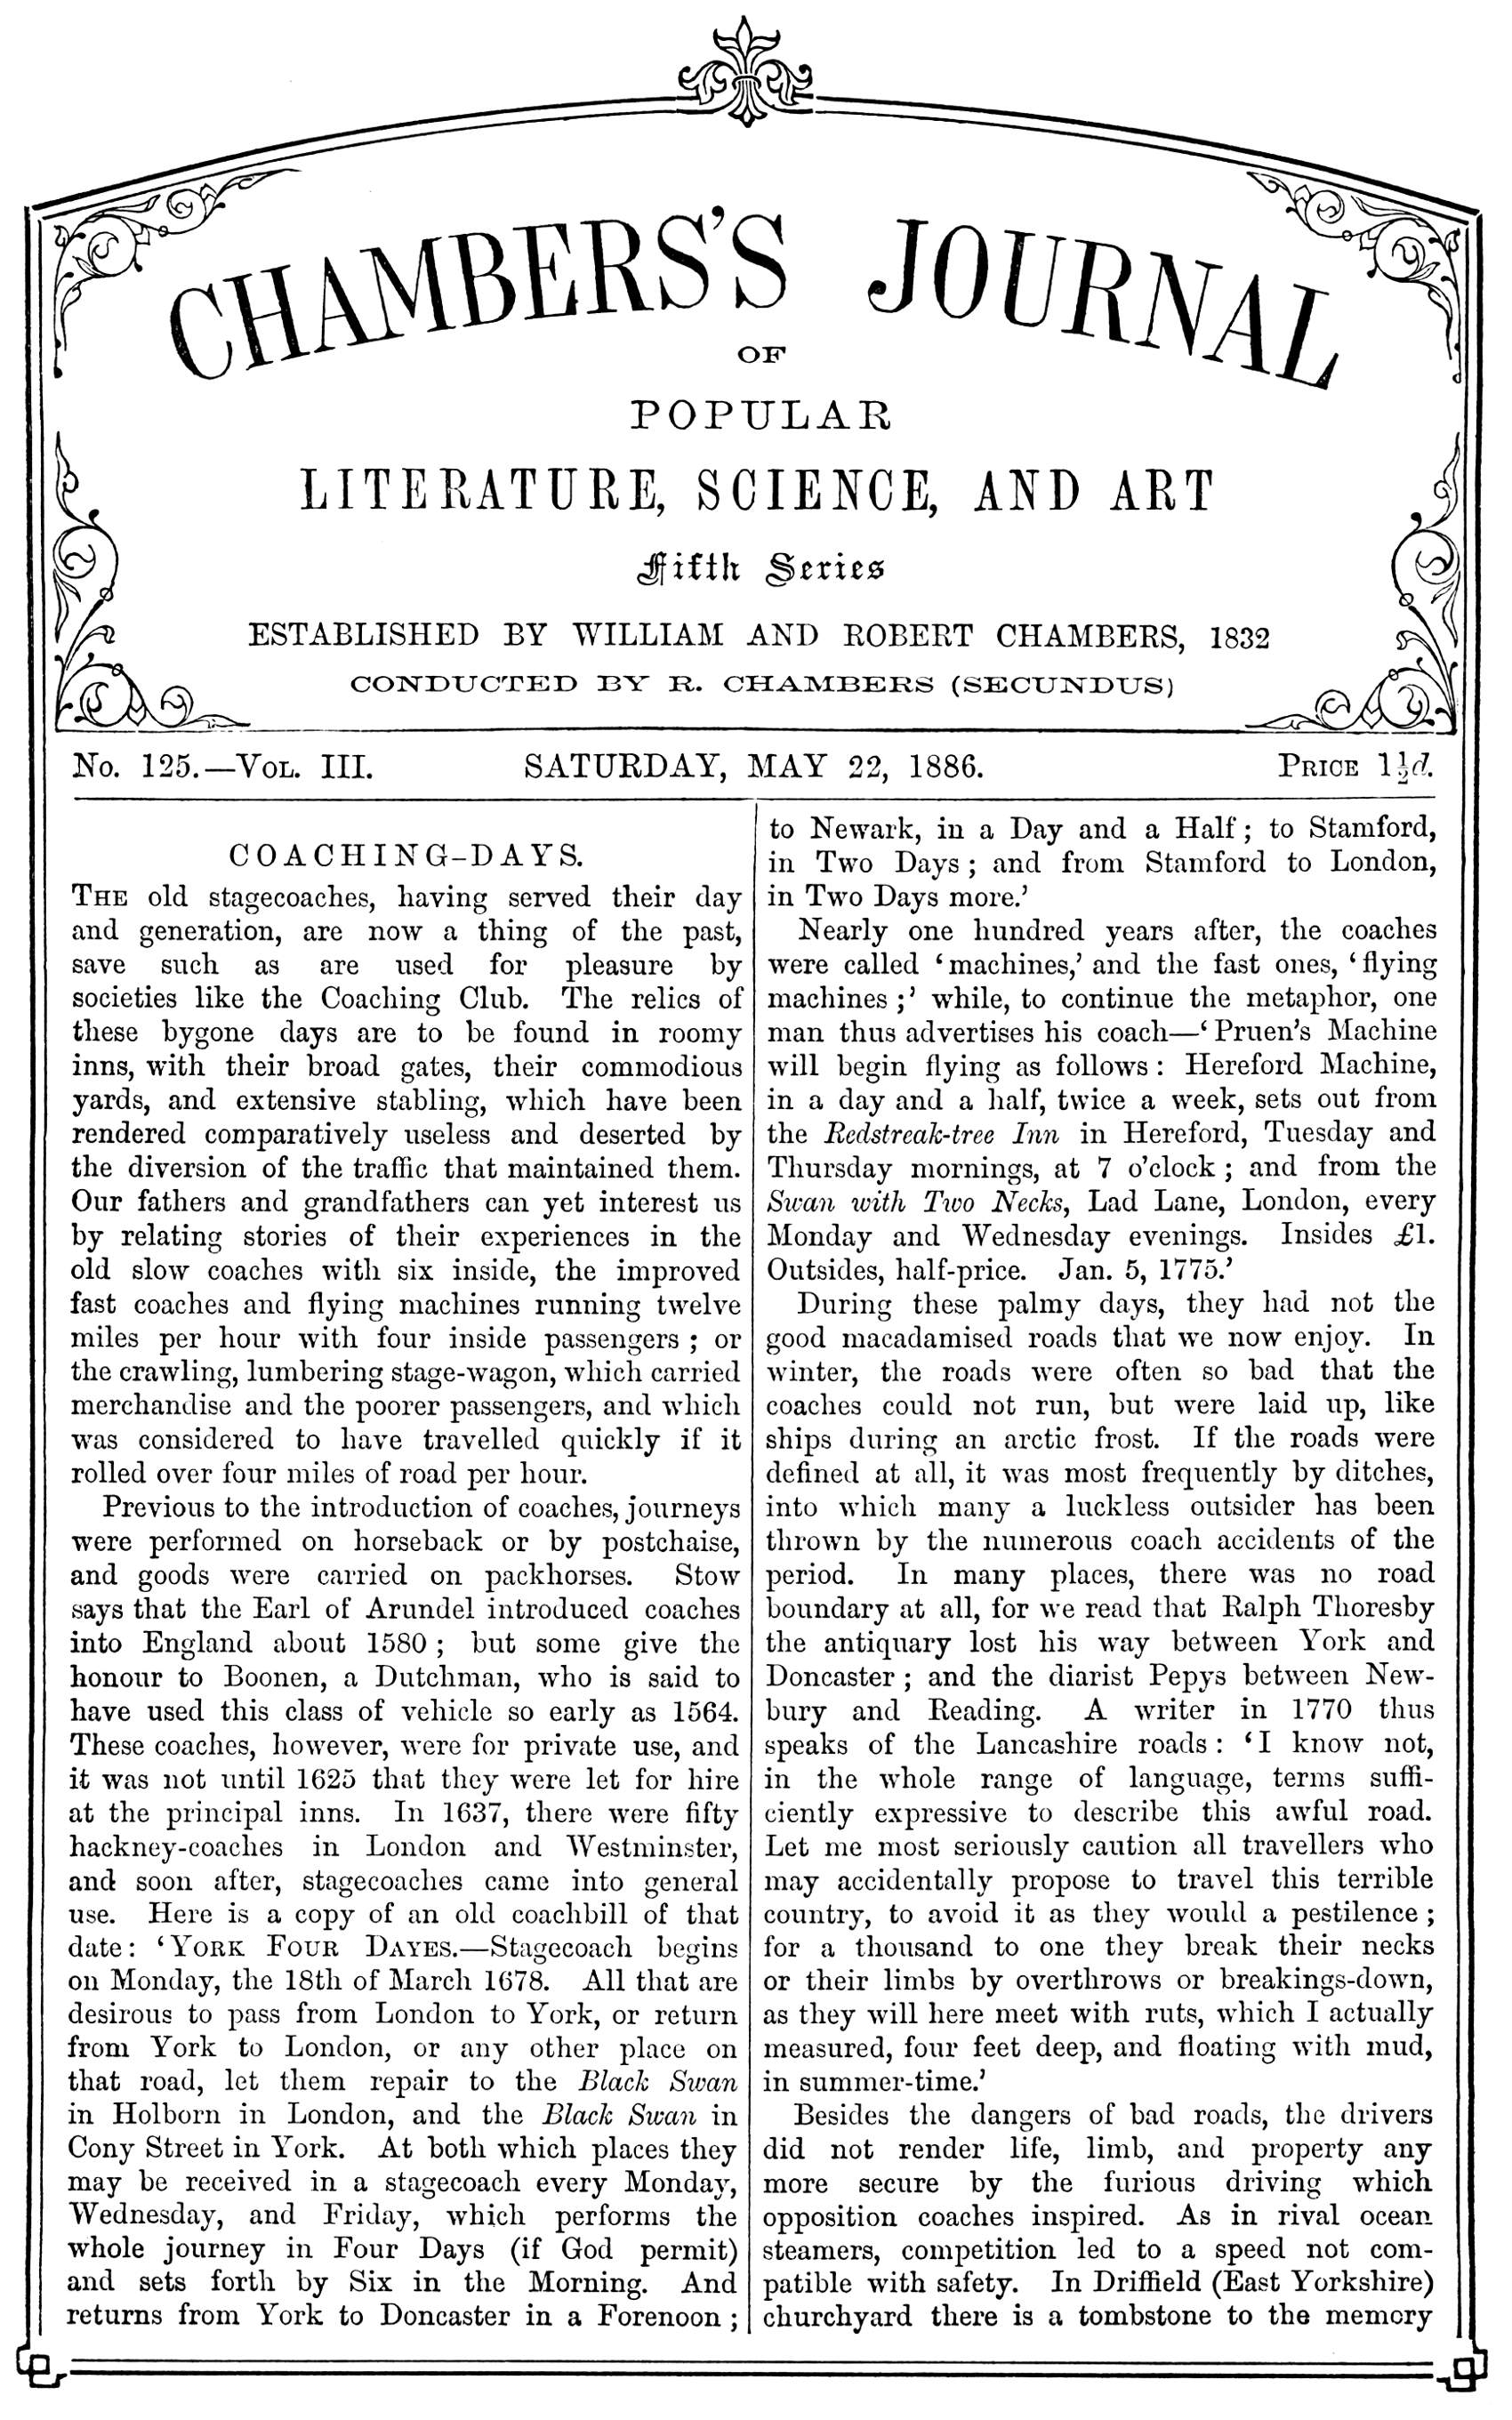 Chambers's journal of popular literature, science, and art, fifth series, no. 125, vol. III, May 22, 1886